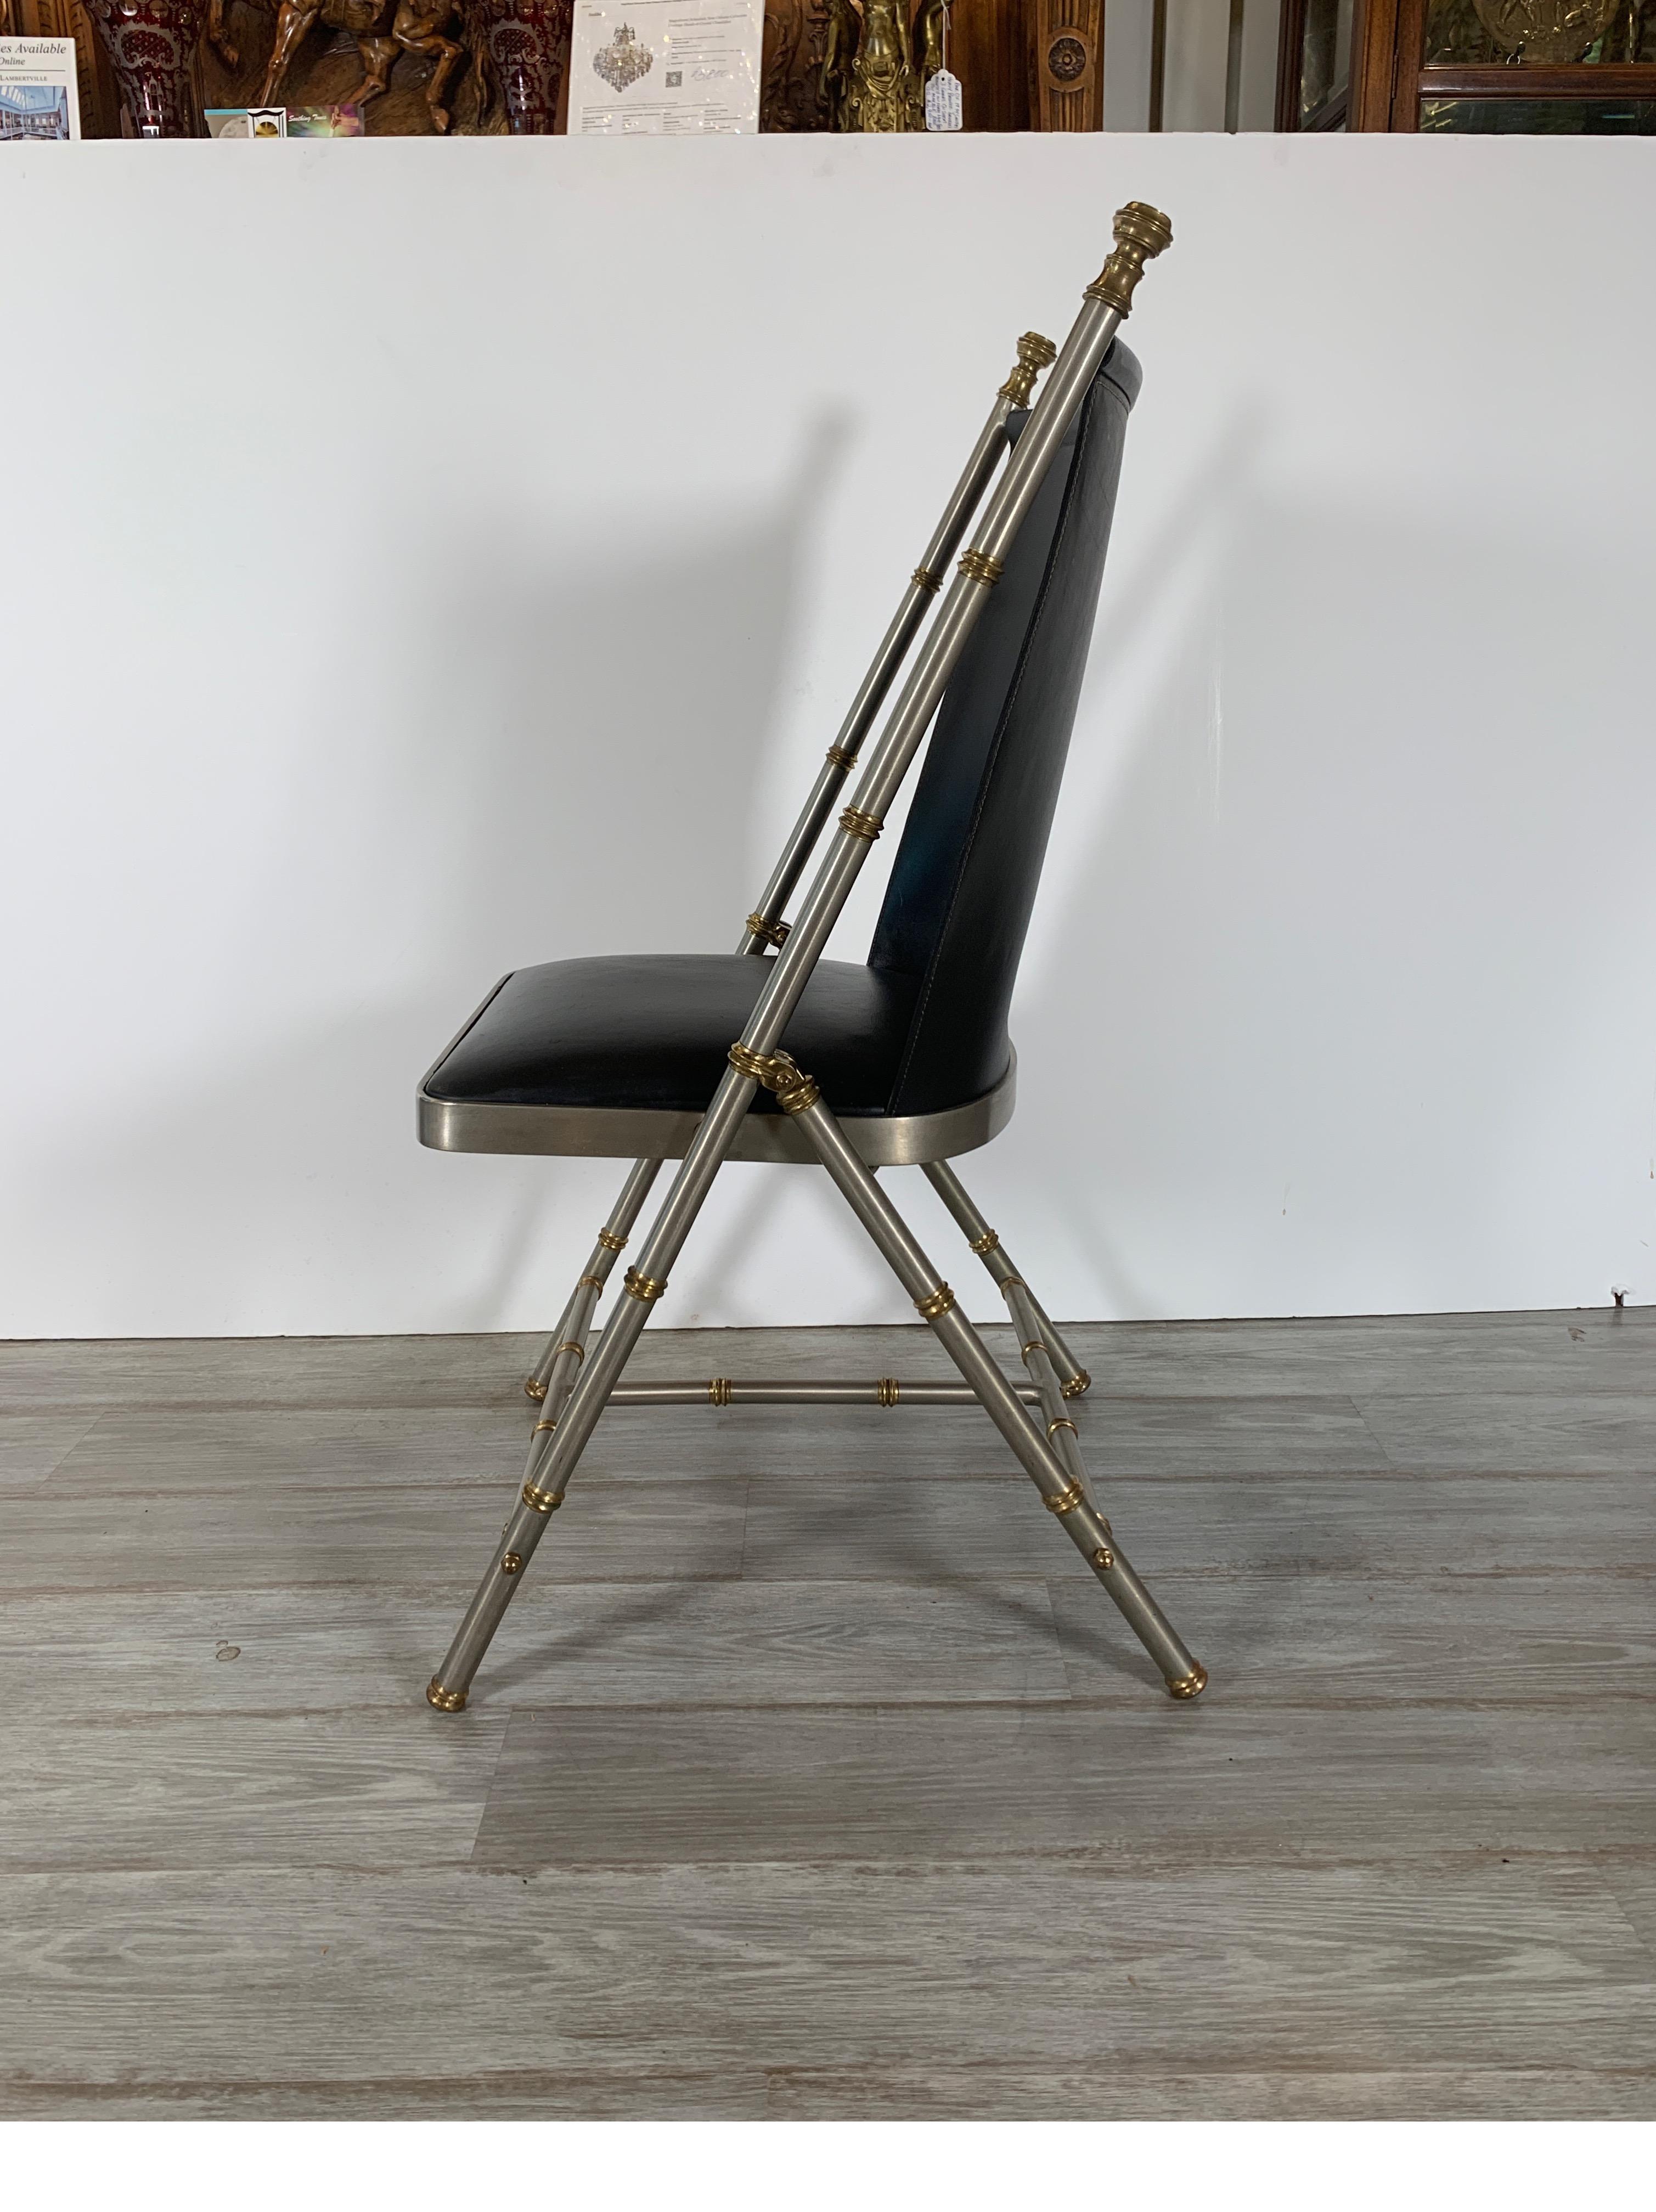 European Brushed Steel and Brass Campaign Style Chair with Leather